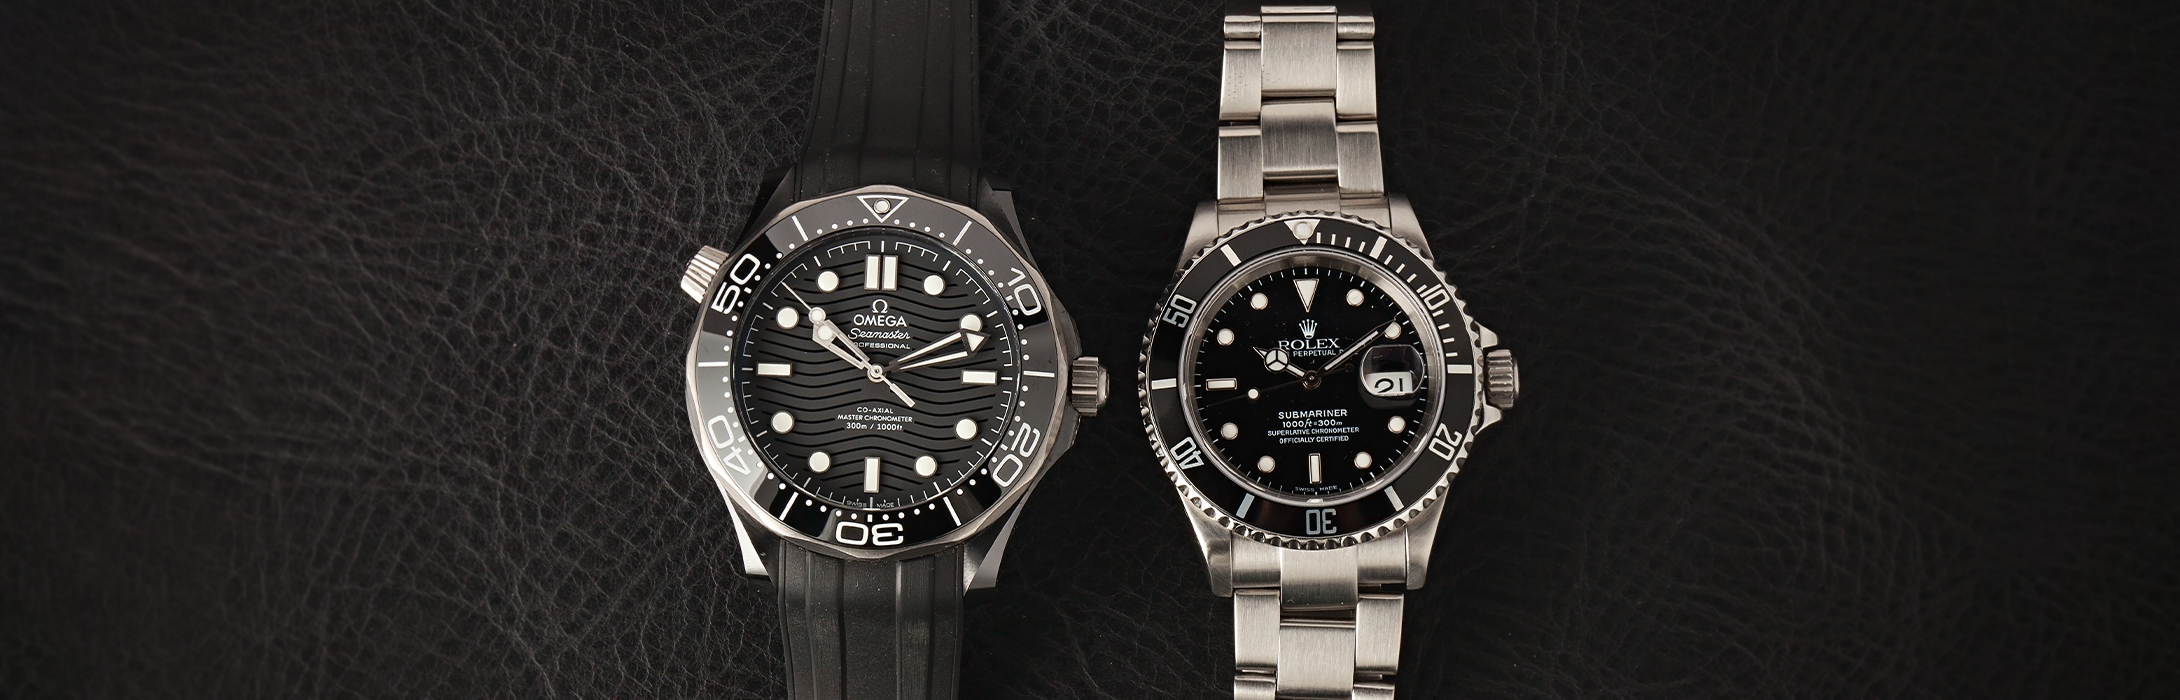 rolex-watches-vs-omega-watches